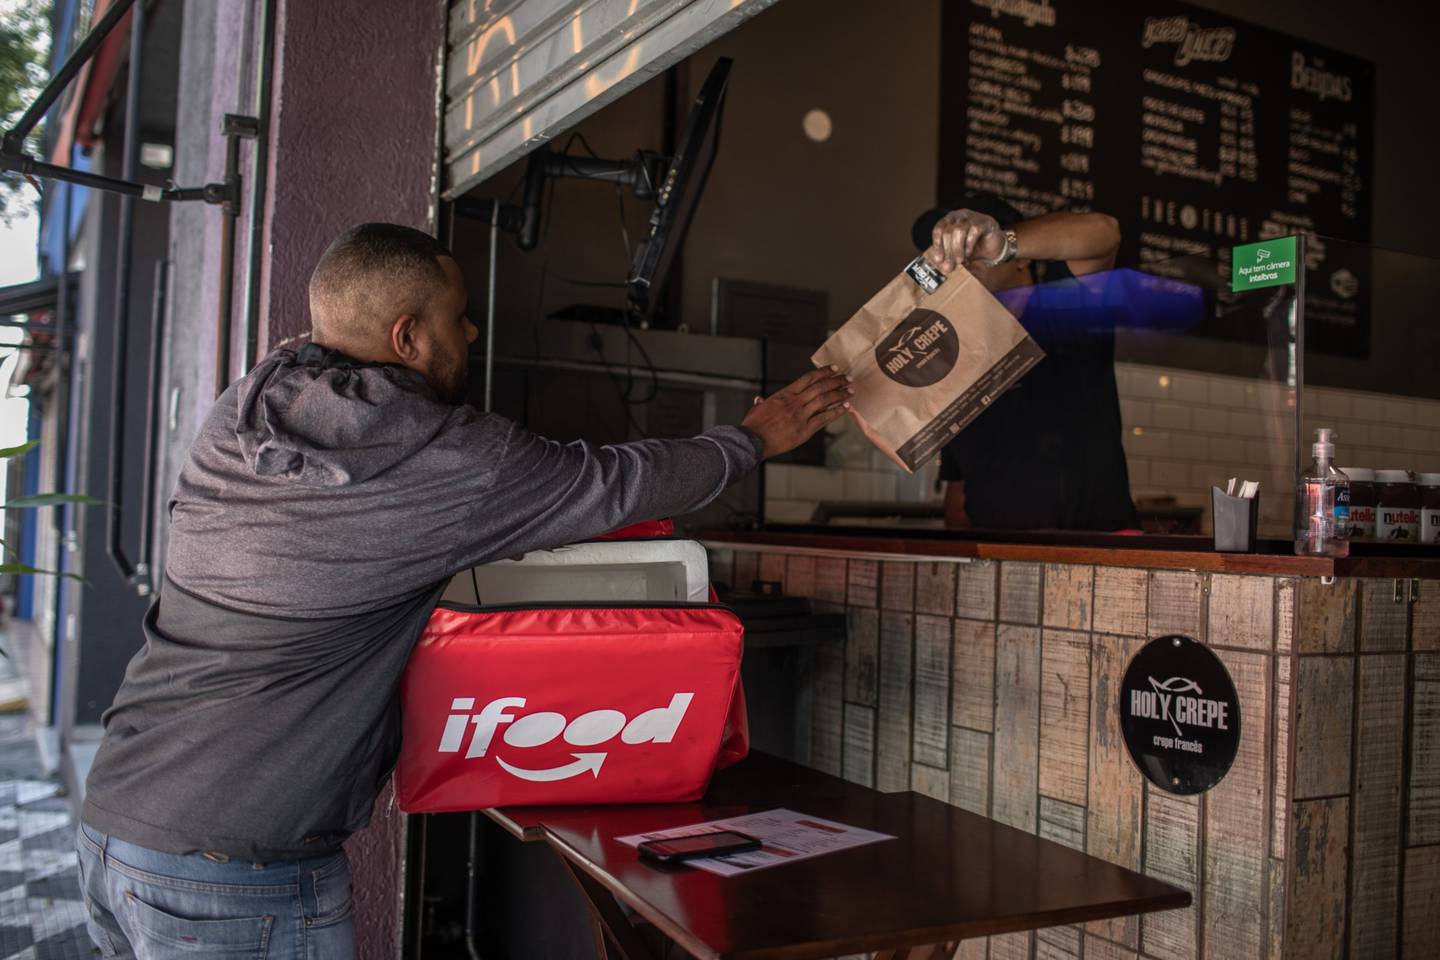 A worker picks up food from a restaurant to make an iFood app delivery in Sao Paulo, Brazil, on Wednesday, April 1, 2020.dfd